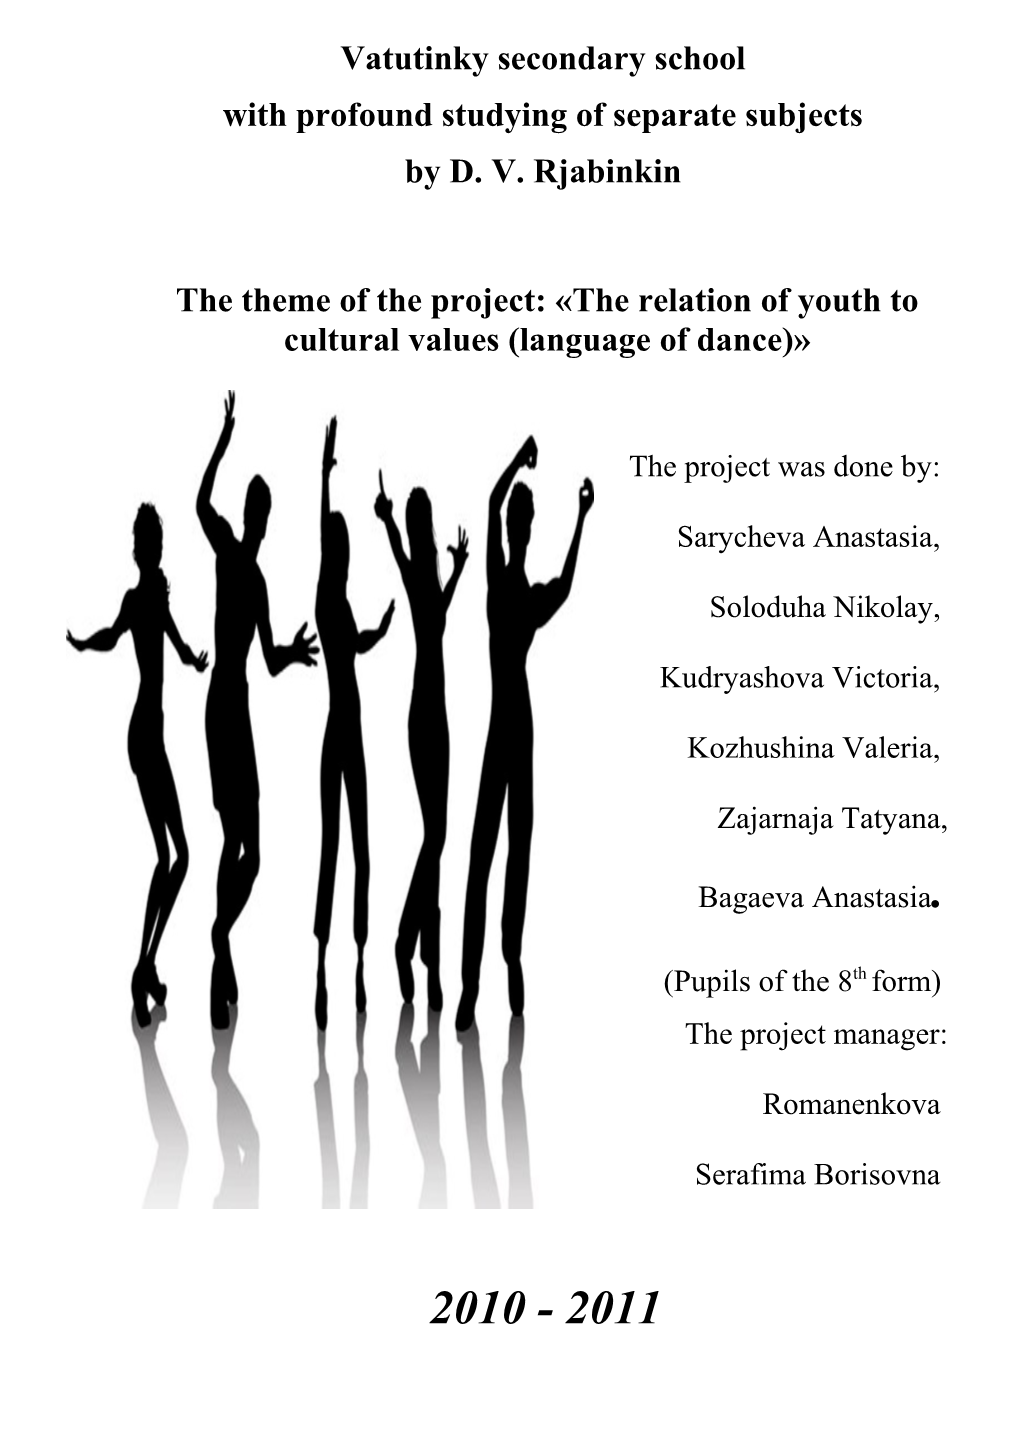 The Theme Ofthe Project: the Relation of Youth to Cultural Values (Language of Dance)